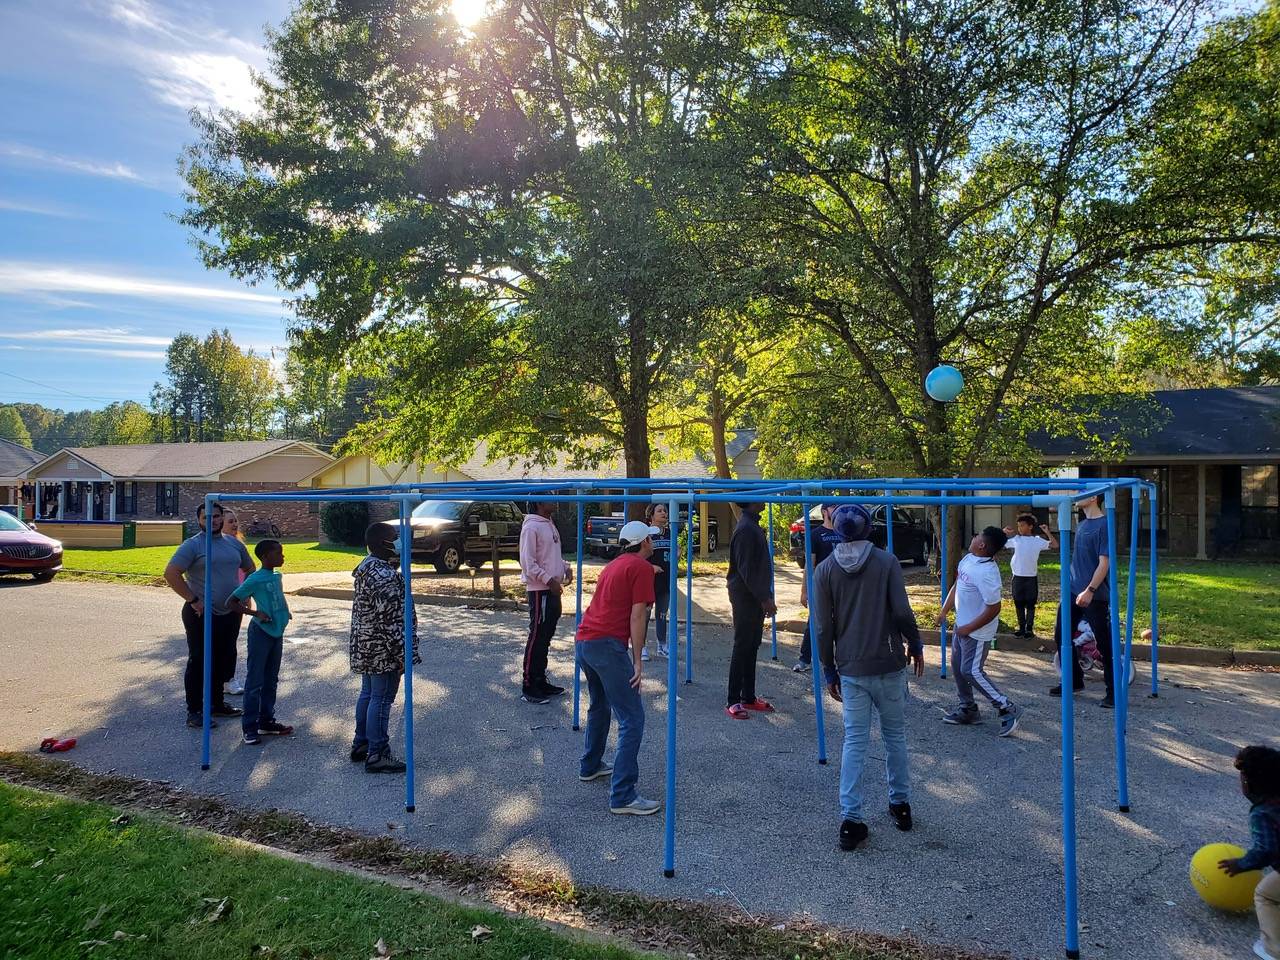 9 Square in the Air brings people together for Good Neighbor Day, offering an easy way to connect.